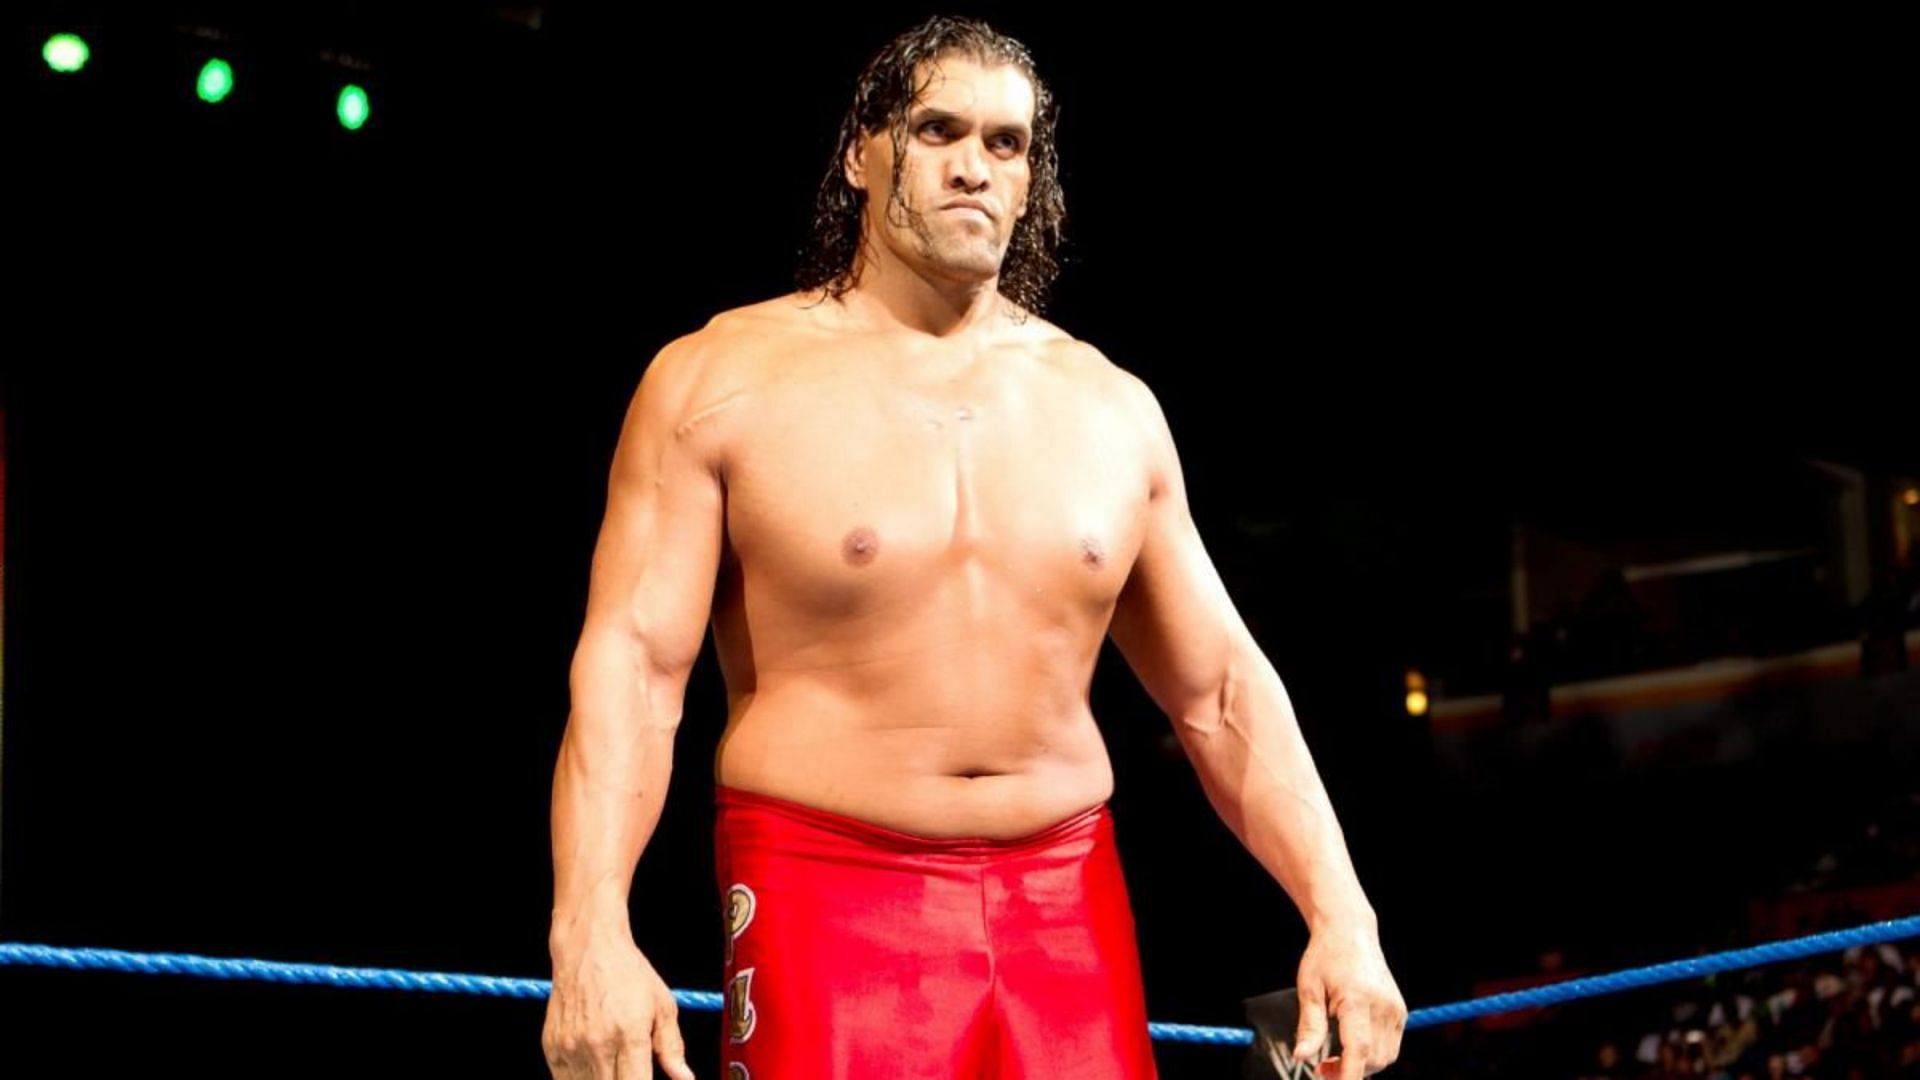 WWE Hall of Famer The Great Khali also had acromegaly